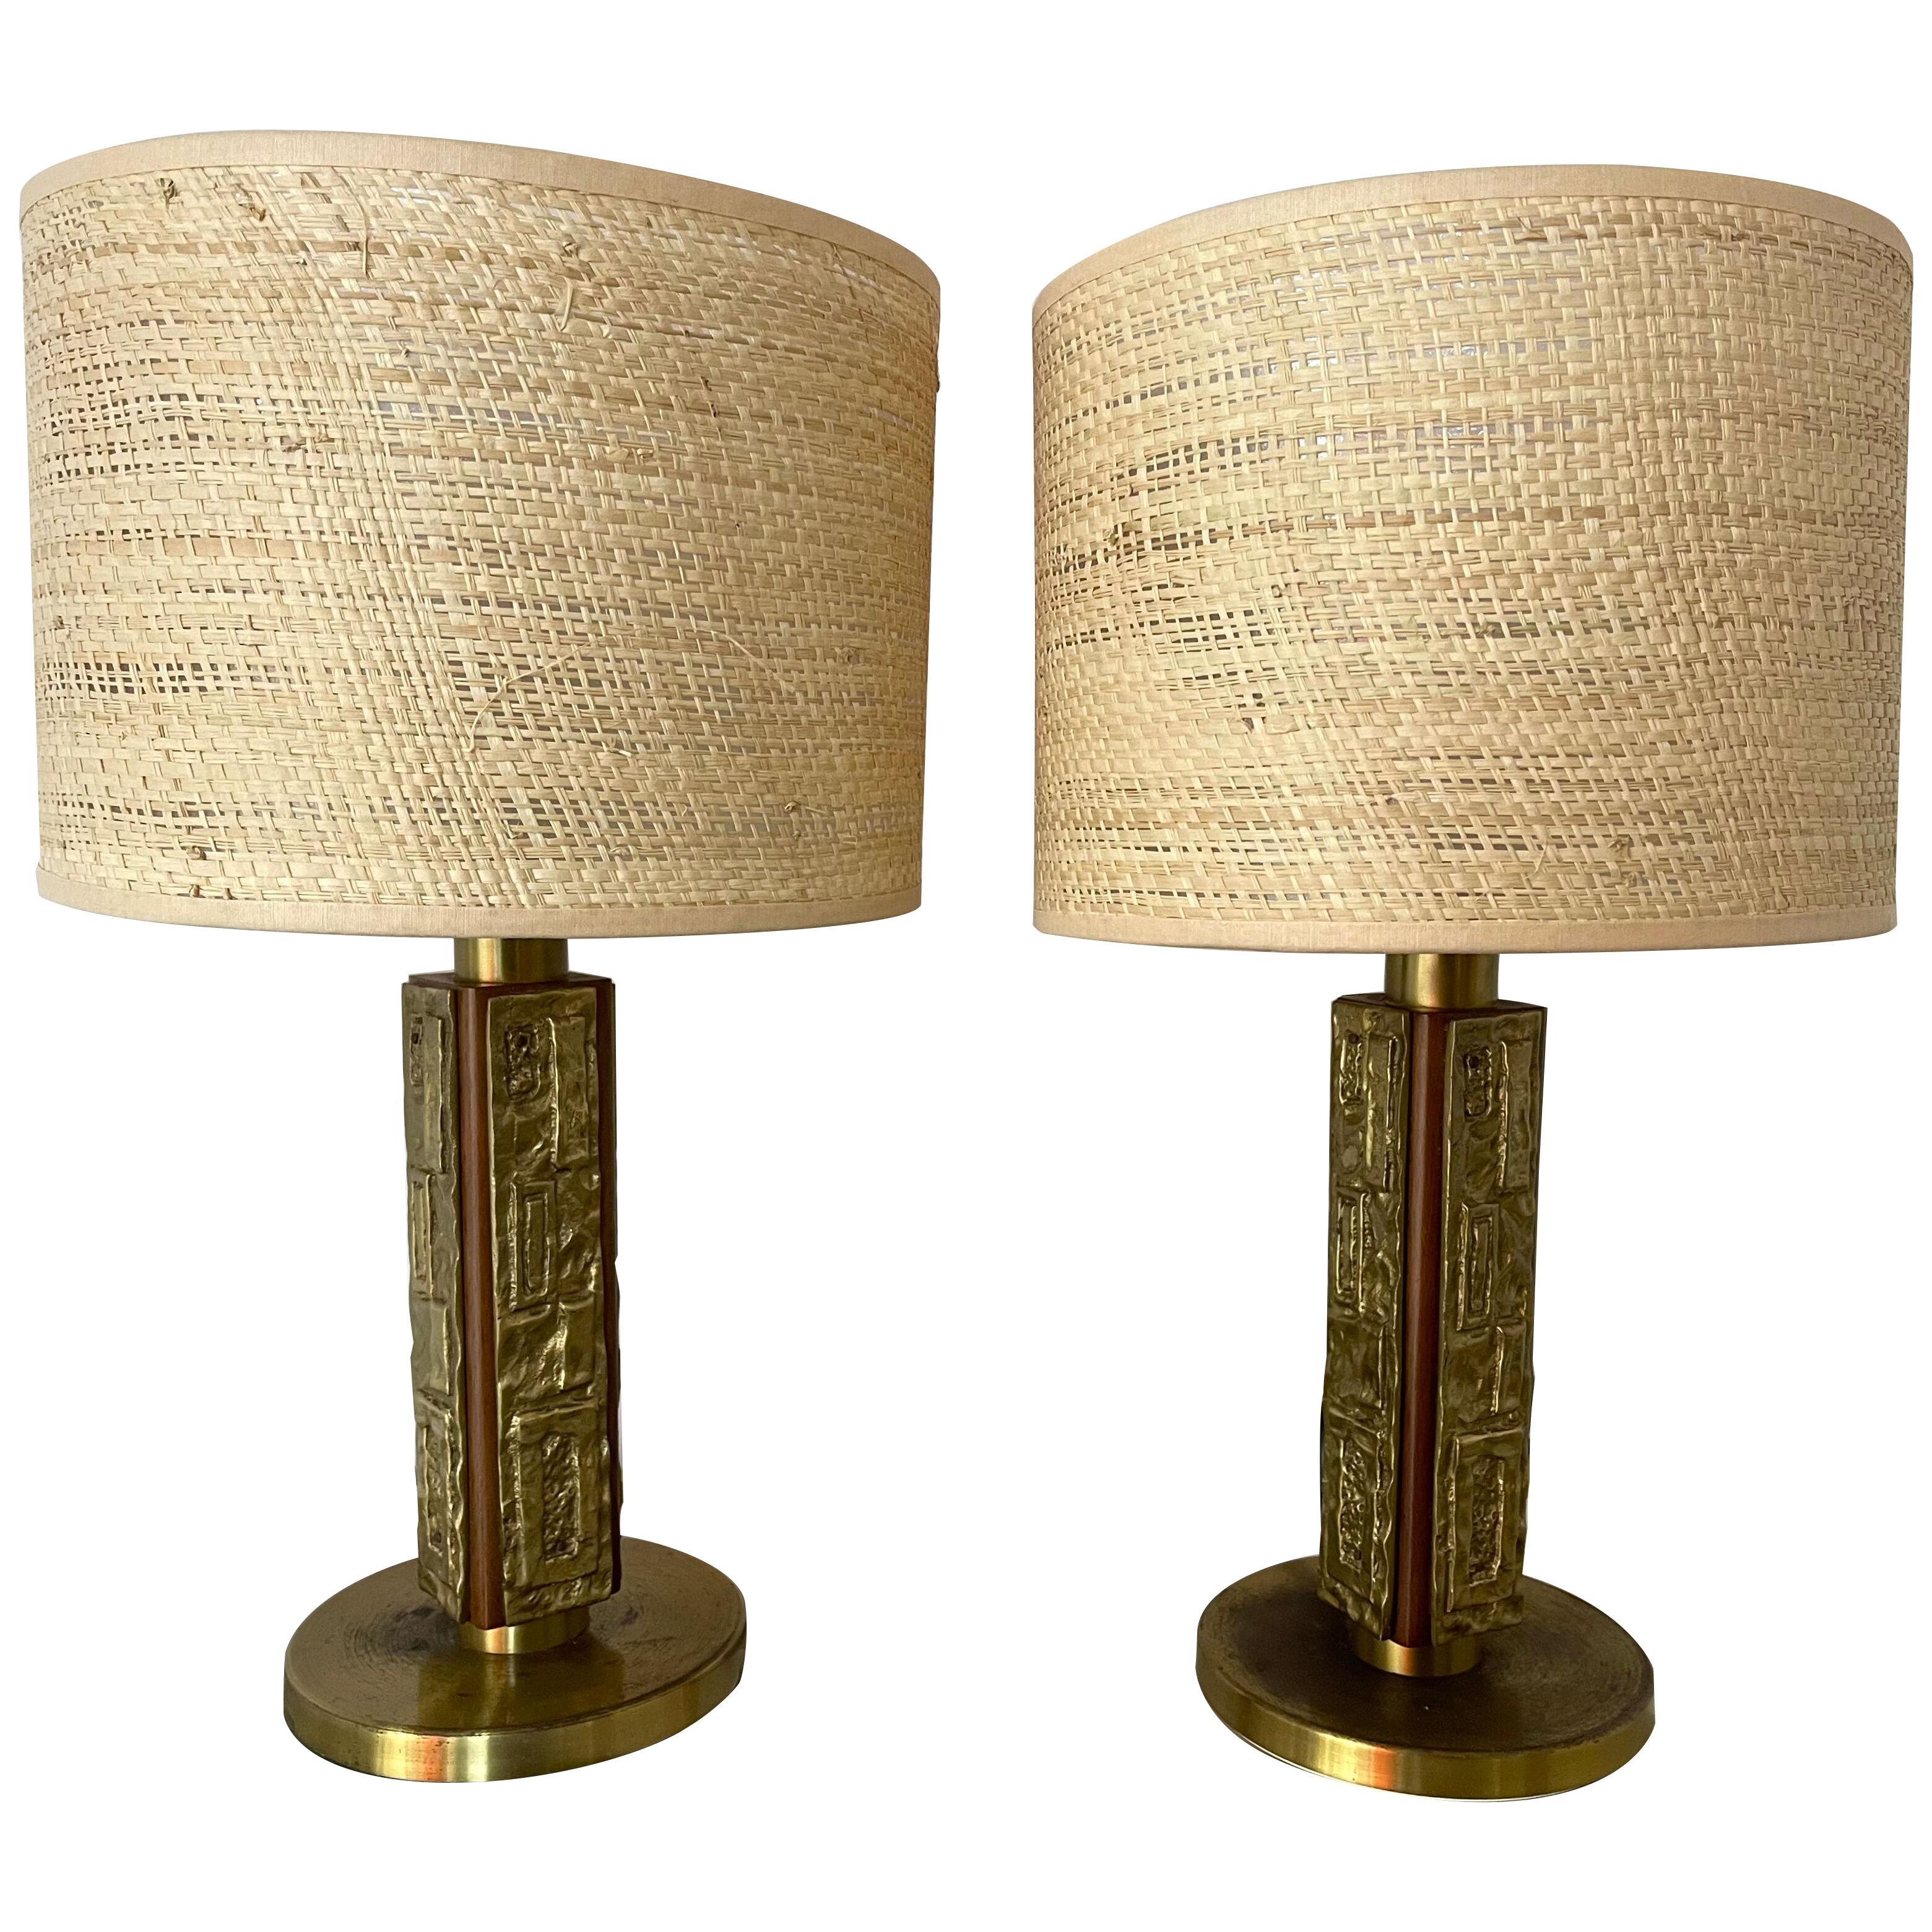 Pair of Brass and Wood Sculpture Lamps by Angelo Brotto for Esperia. Italy 1970s